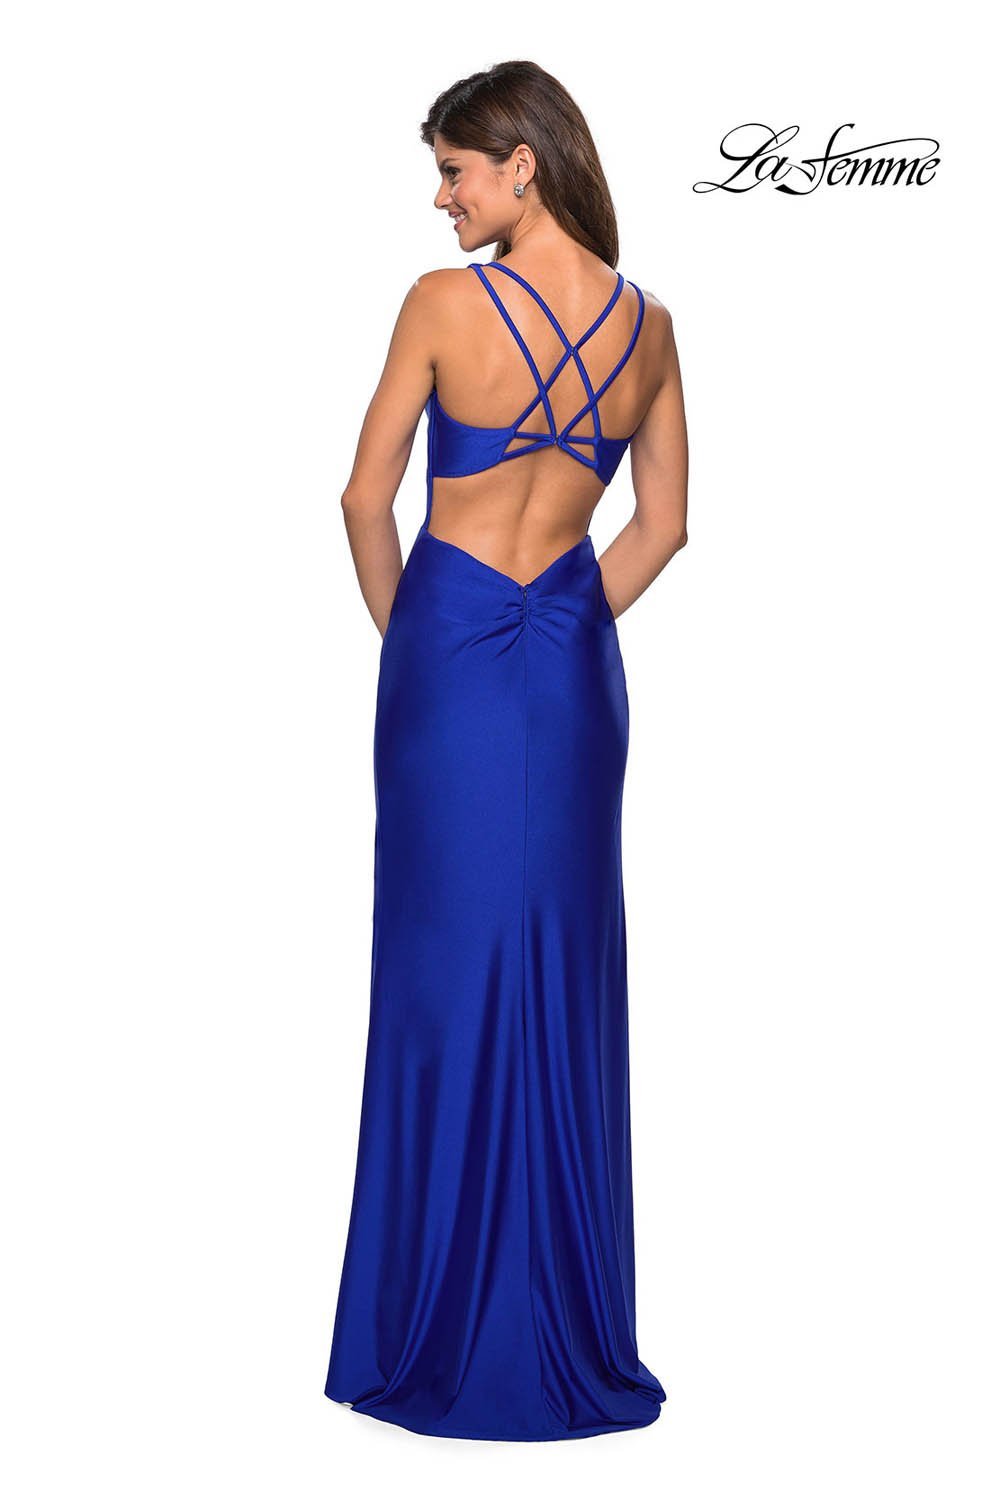 La Femme 27602 dress images in these colors: Black, Hot Fuchsia, Royal Blue, Yellow.